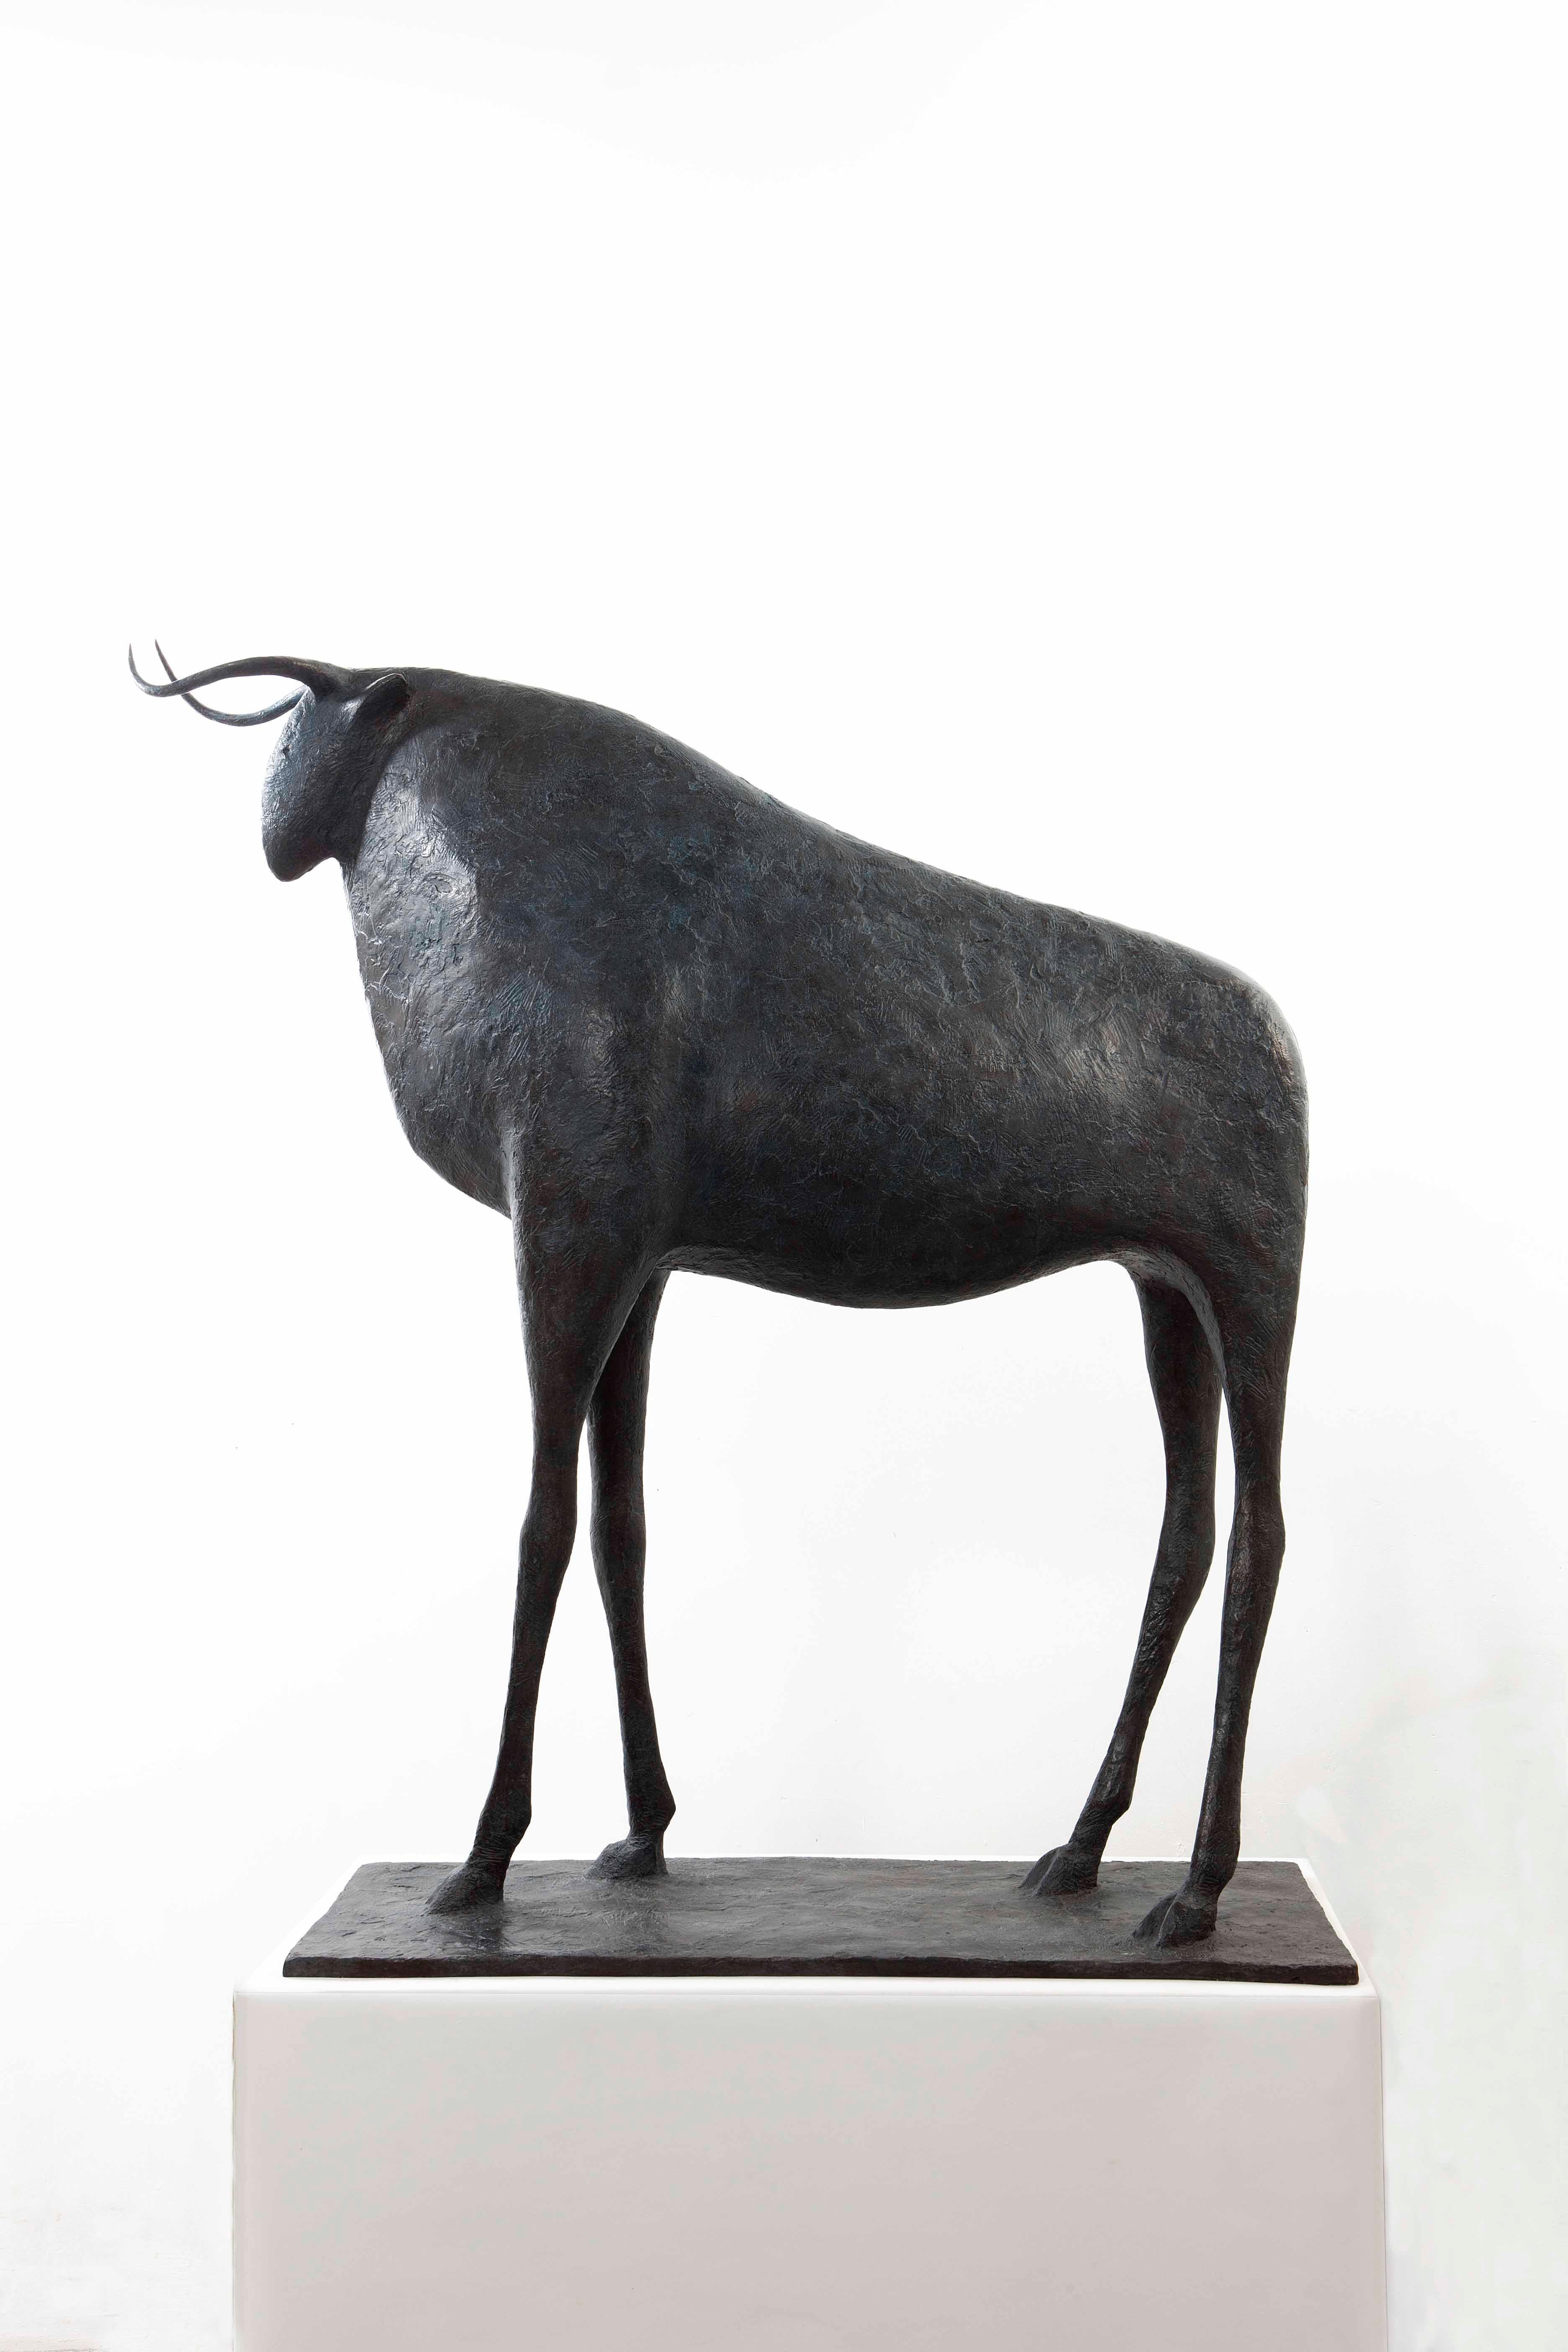 Large Bull, bronze sculpture by French contemporary artist Pierre Yermia.
120 cm × 100 cm × 34 cm. Limited-edition of 8 copies and 4 artist's proofs, each signed and numbered.
"The bull is the only masculine animal in my bestiary" says the artist,